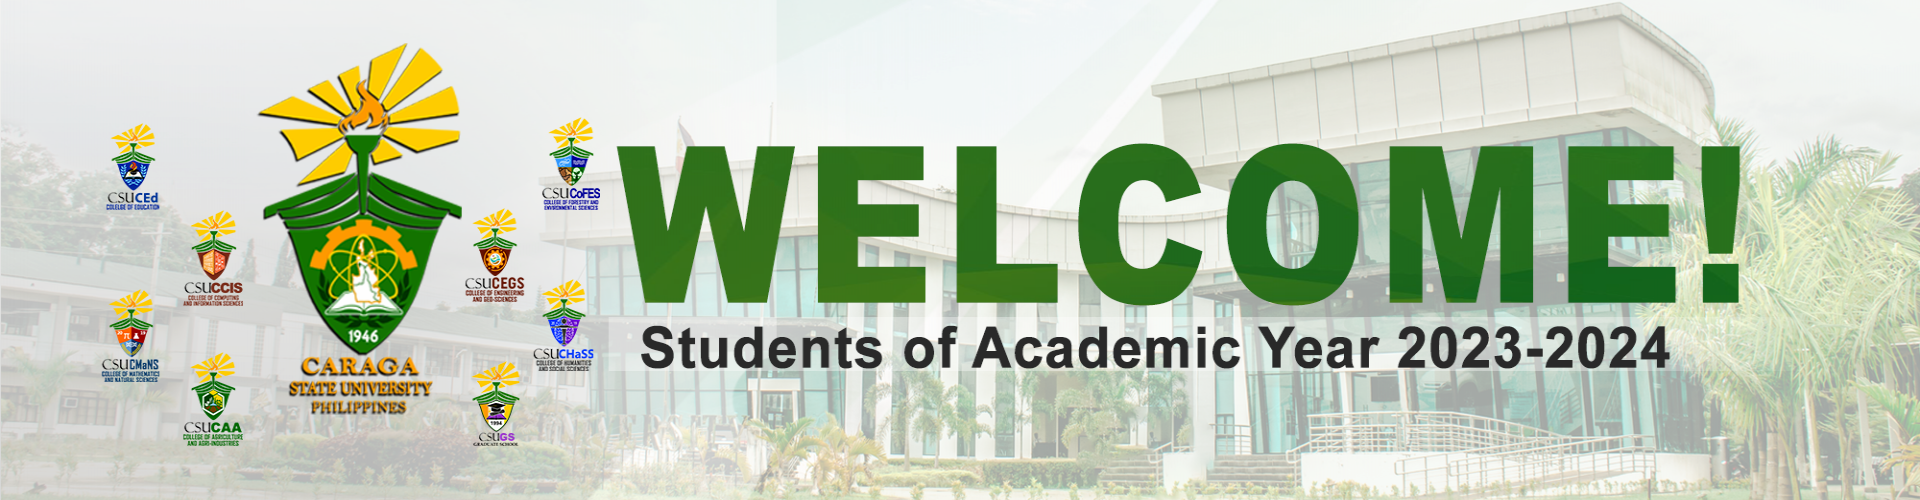 Welcome Banner for Academic Year 2023-2024